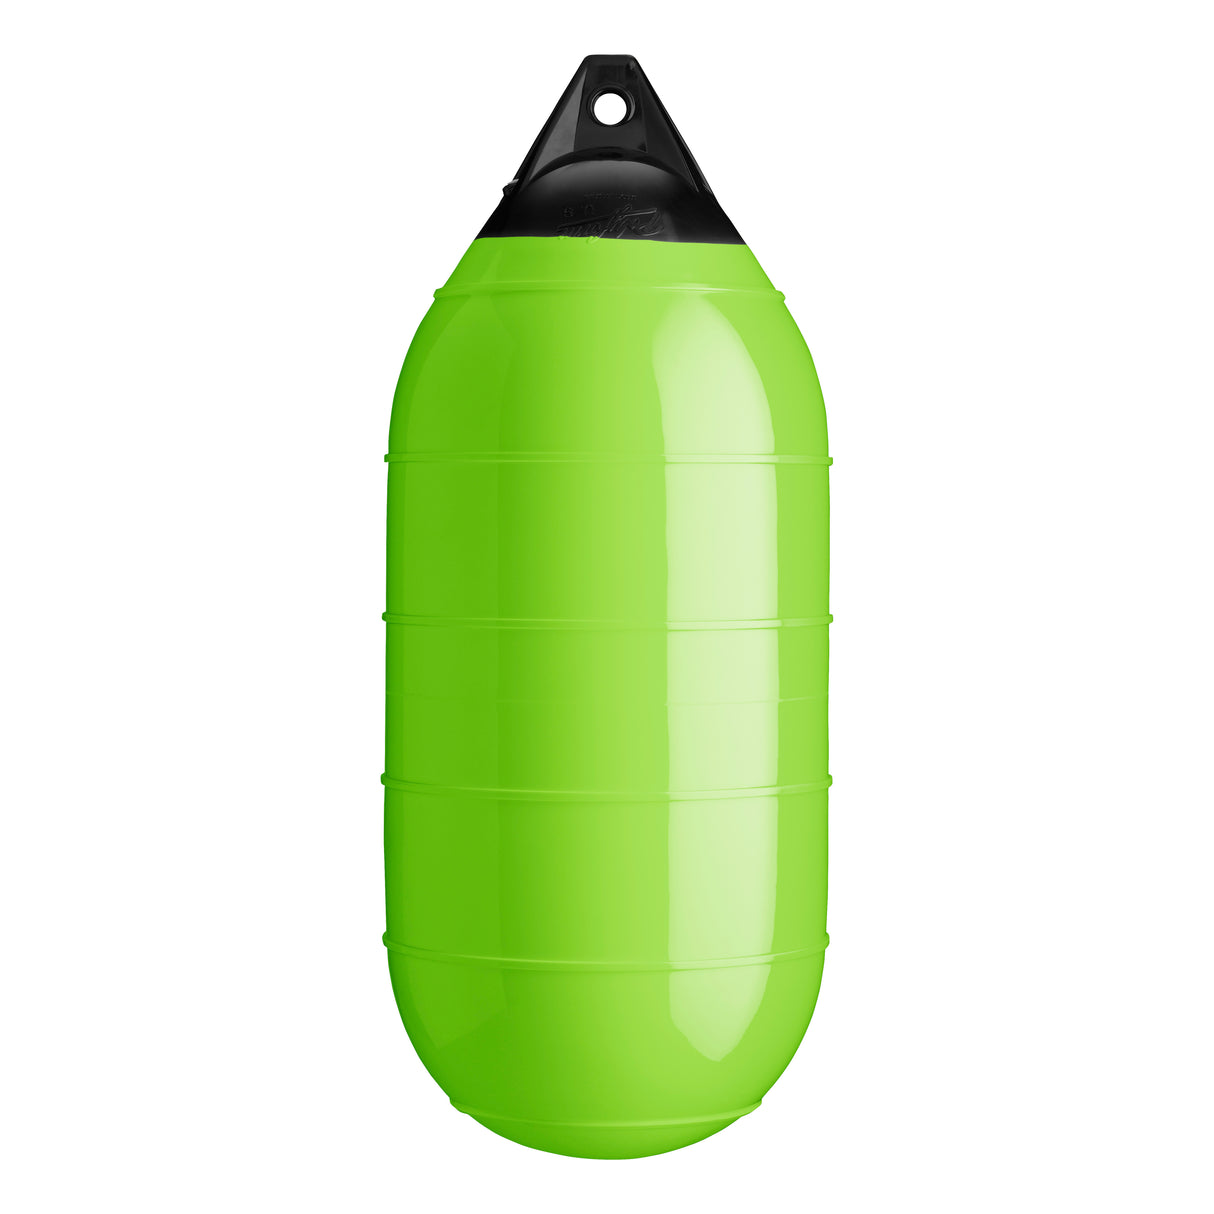 Lime low drag buoy with Black-Top, Polyform LD-4 